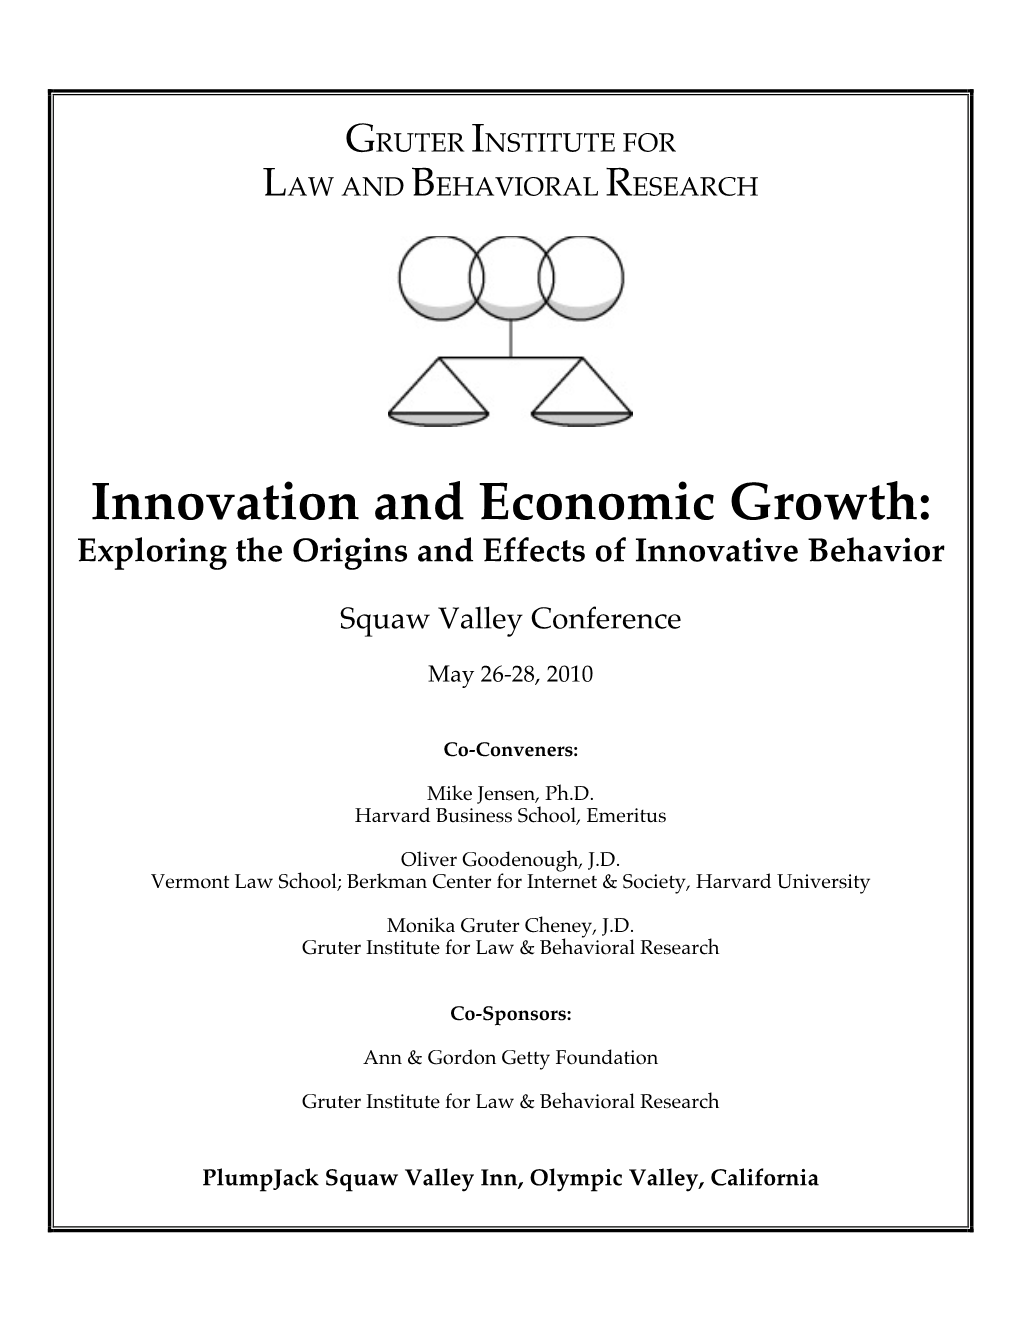 Innovation and Economic Growth: Exploring the Origins and Effects of Innovative Behavior